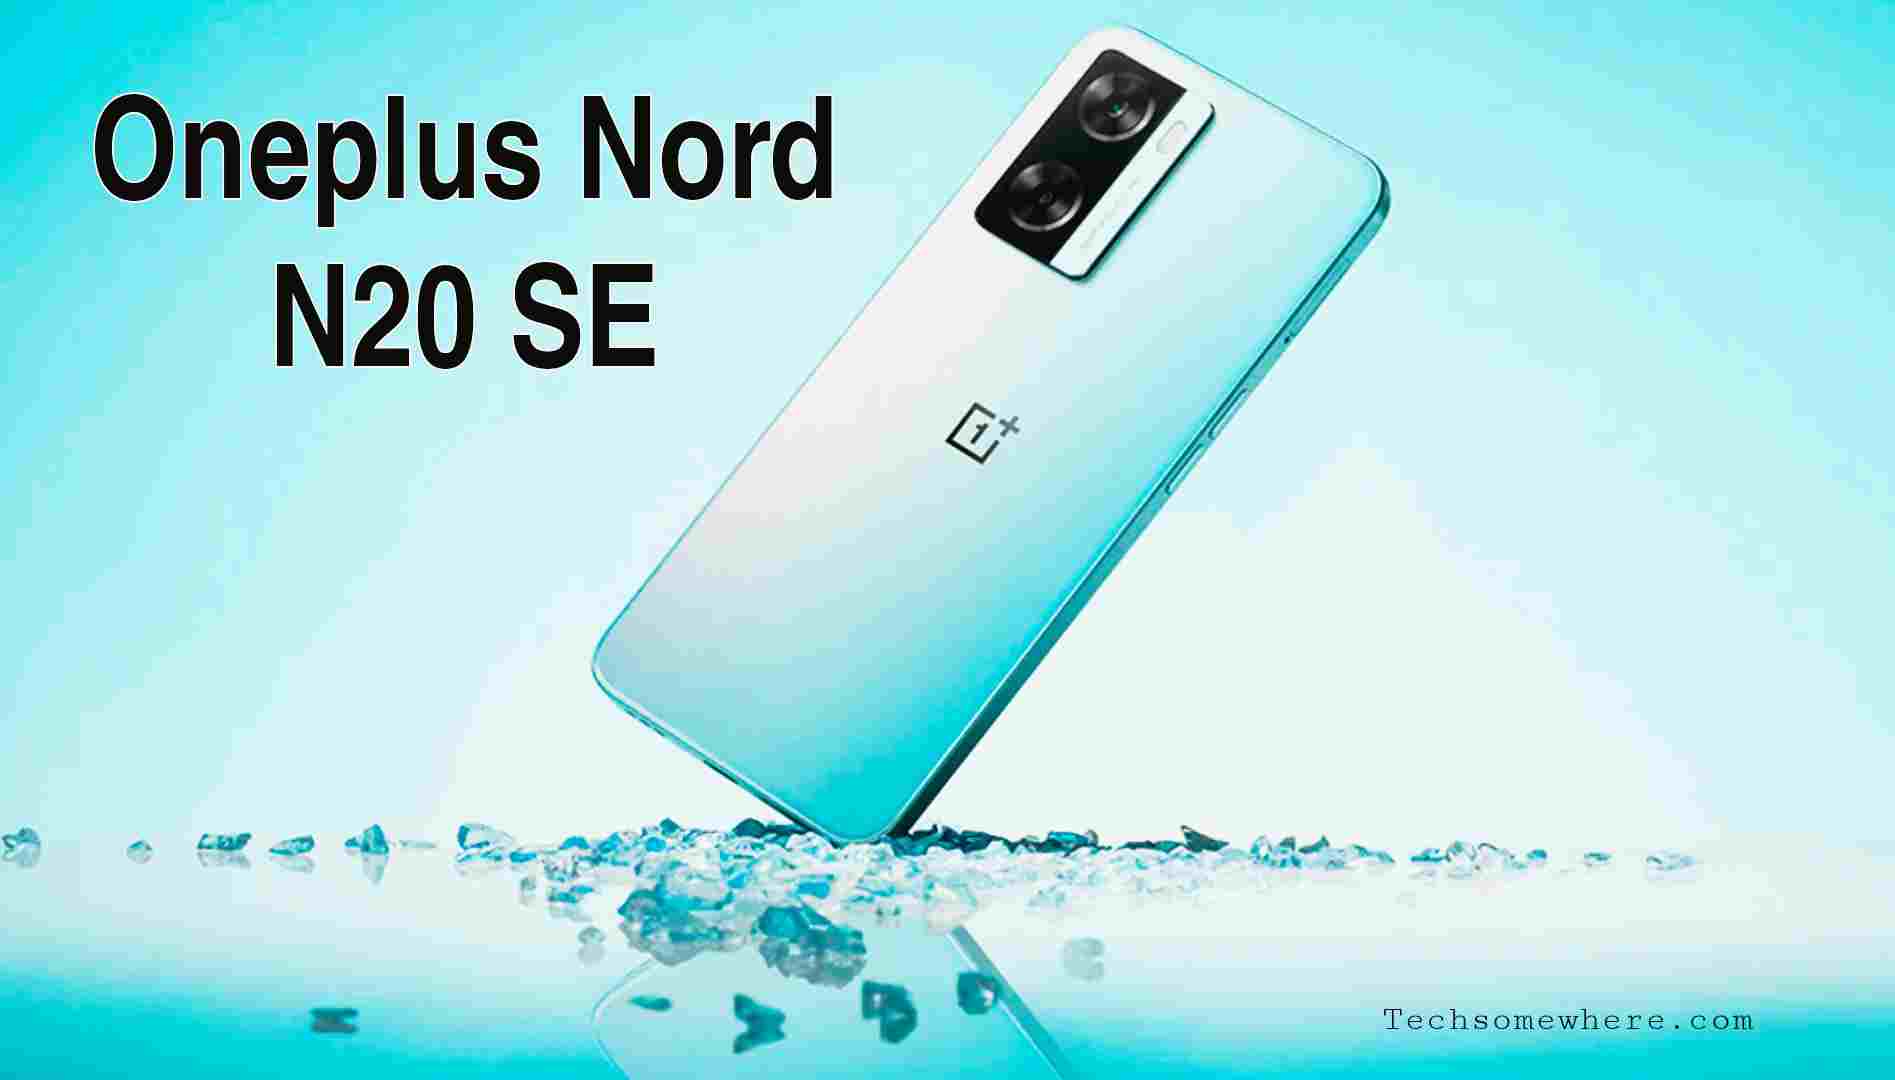 OnePlus Nord N20 SE - All Features, Price, Rumours & Release Date!